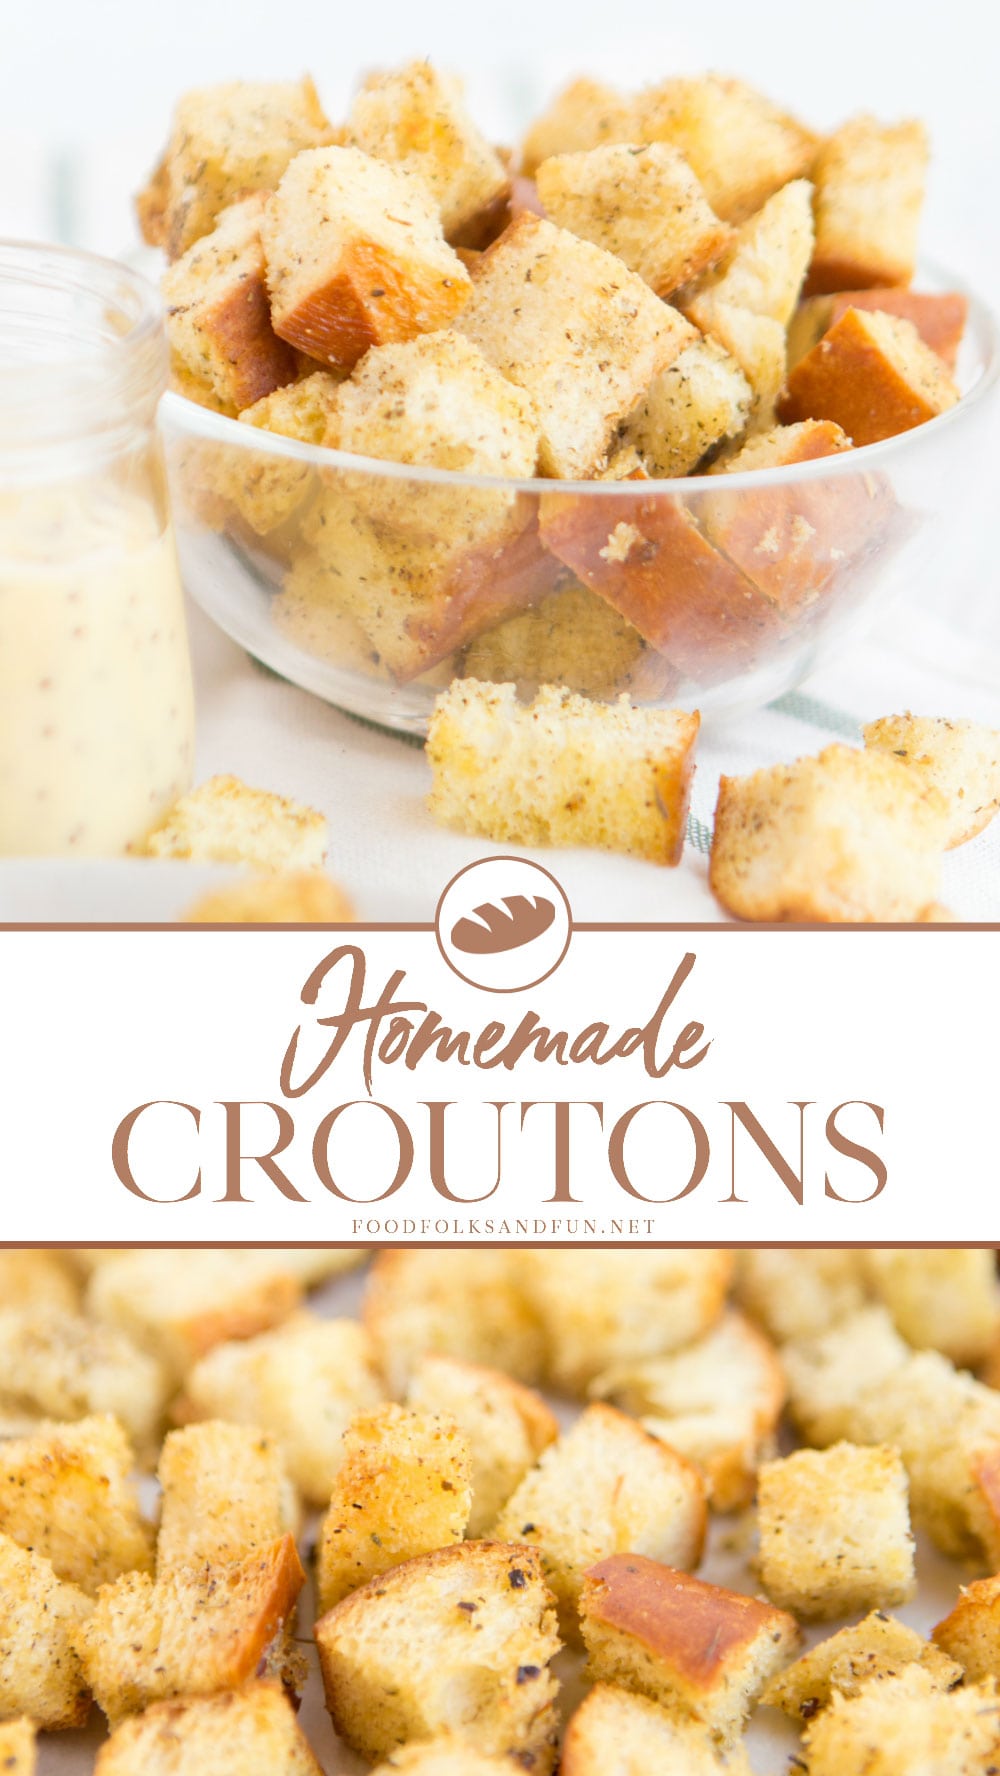 Homemade Croutons are one of those simple pleasures that I look forward to every week when I whip up a quick batch for my family. They’re super simple to make and they add a little extra love to our salads. via @foodfolksandfun